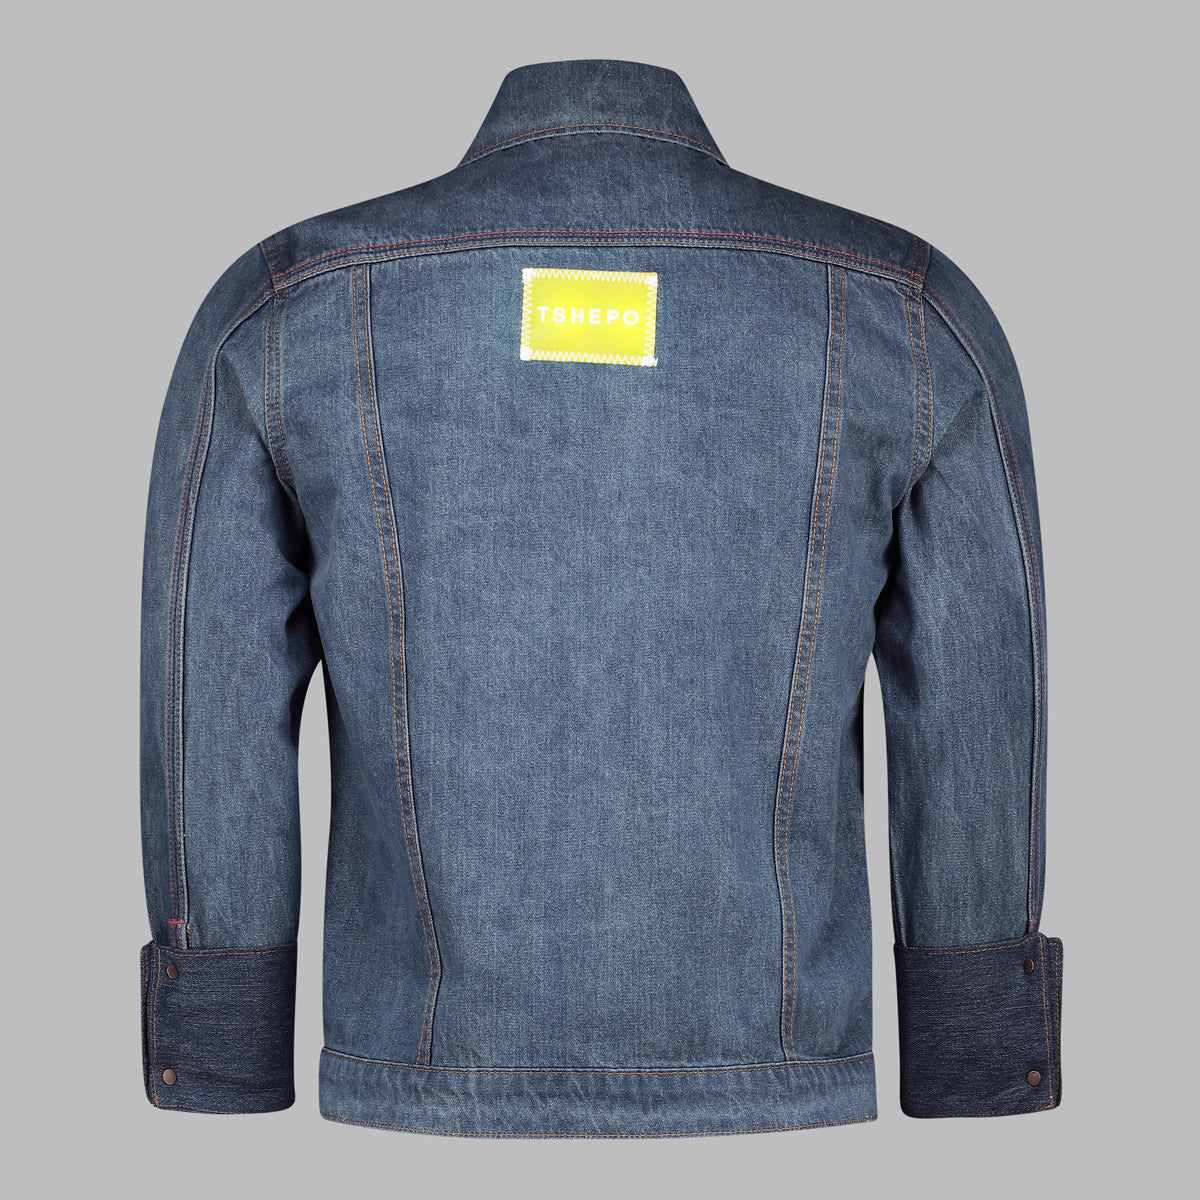 The full back of a TSHEPO Light wash trucker jacket with a yellow leather patch